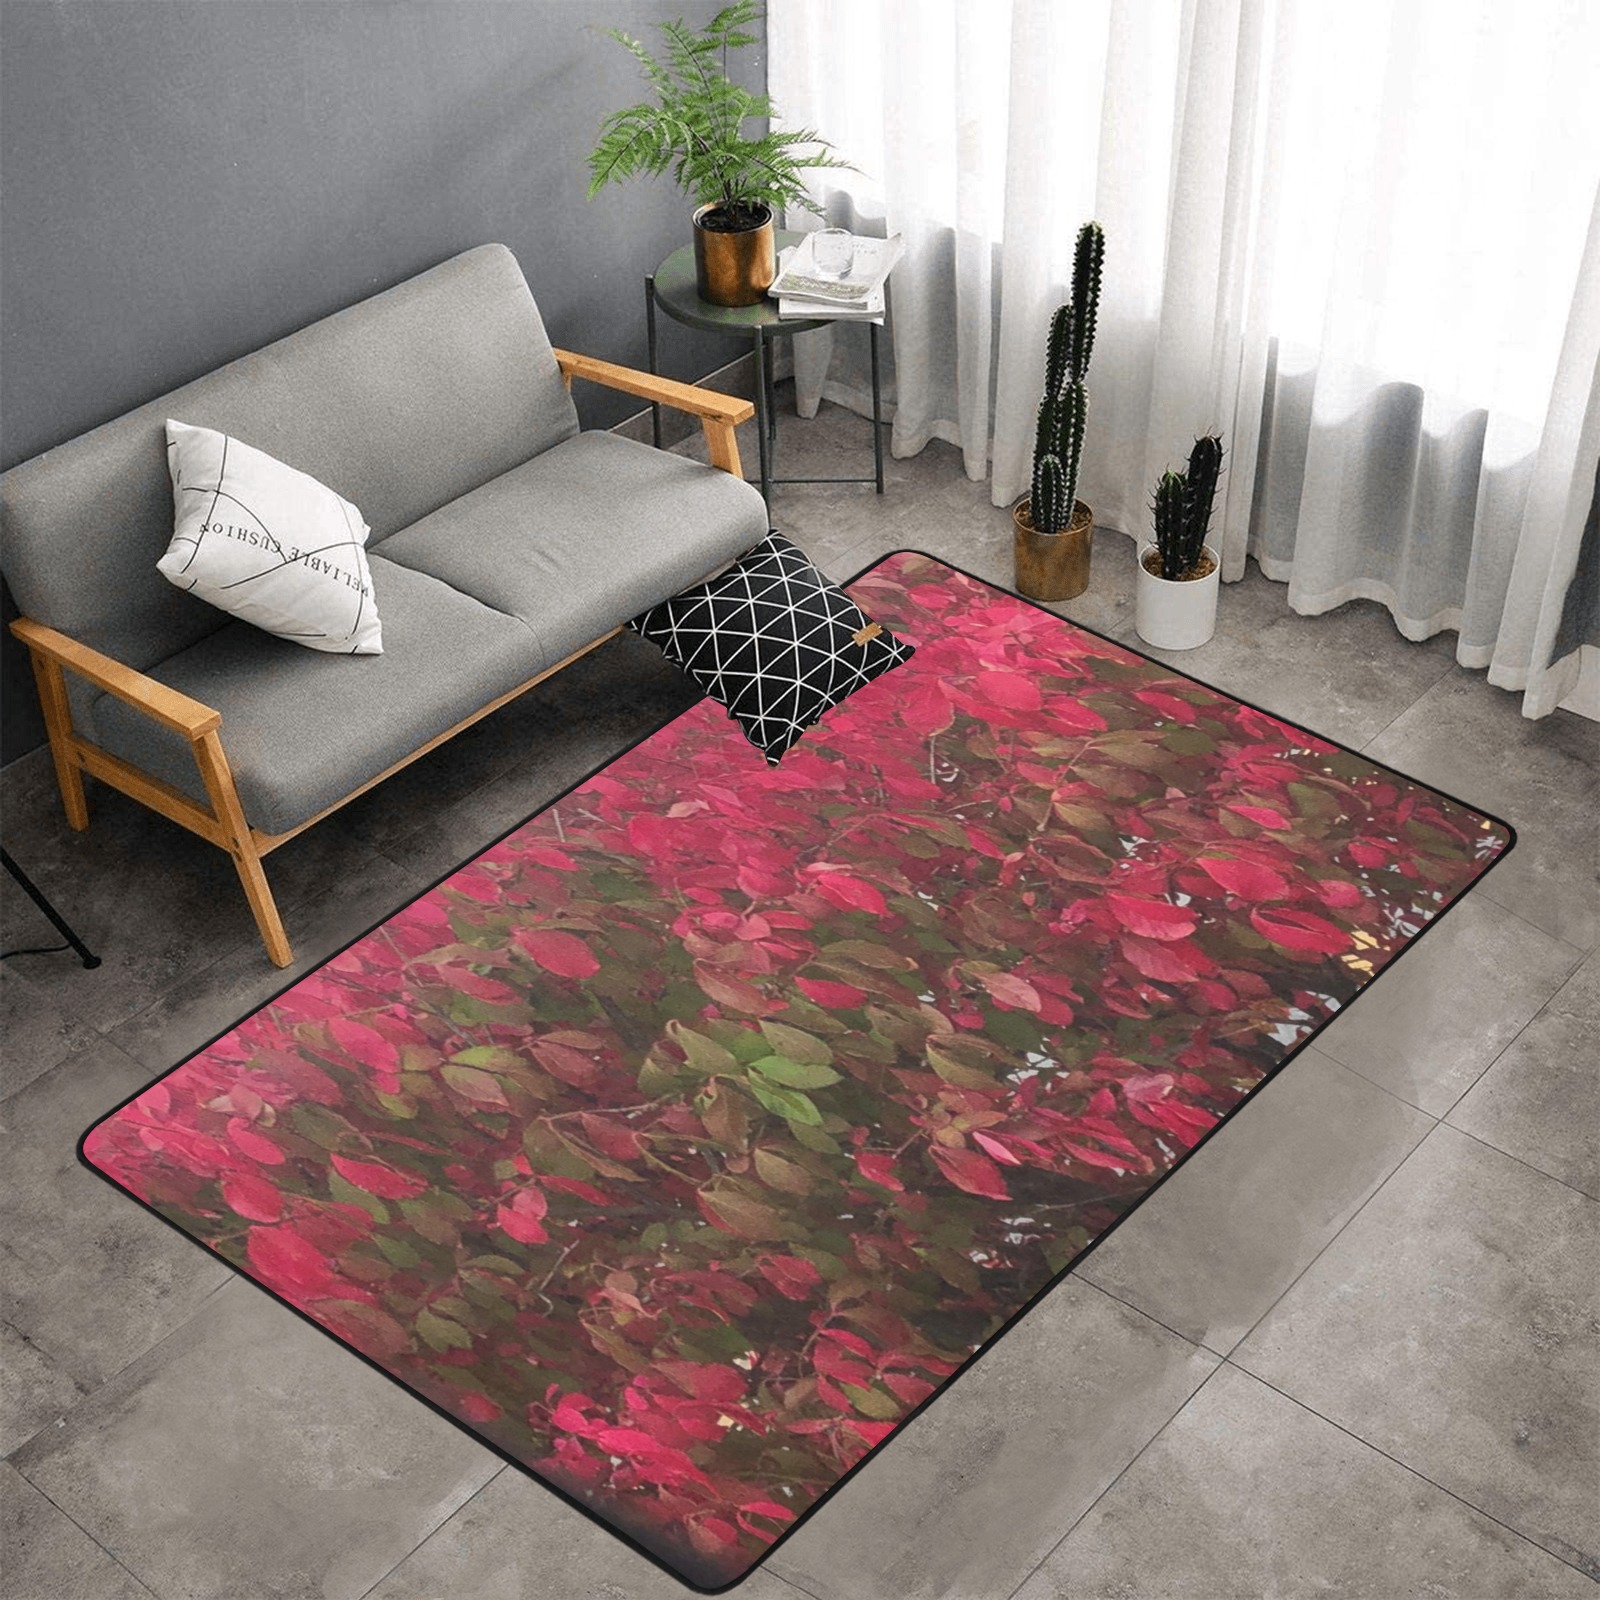 Changing Seasons Collection Area Rug with Black Binding 7'x5'